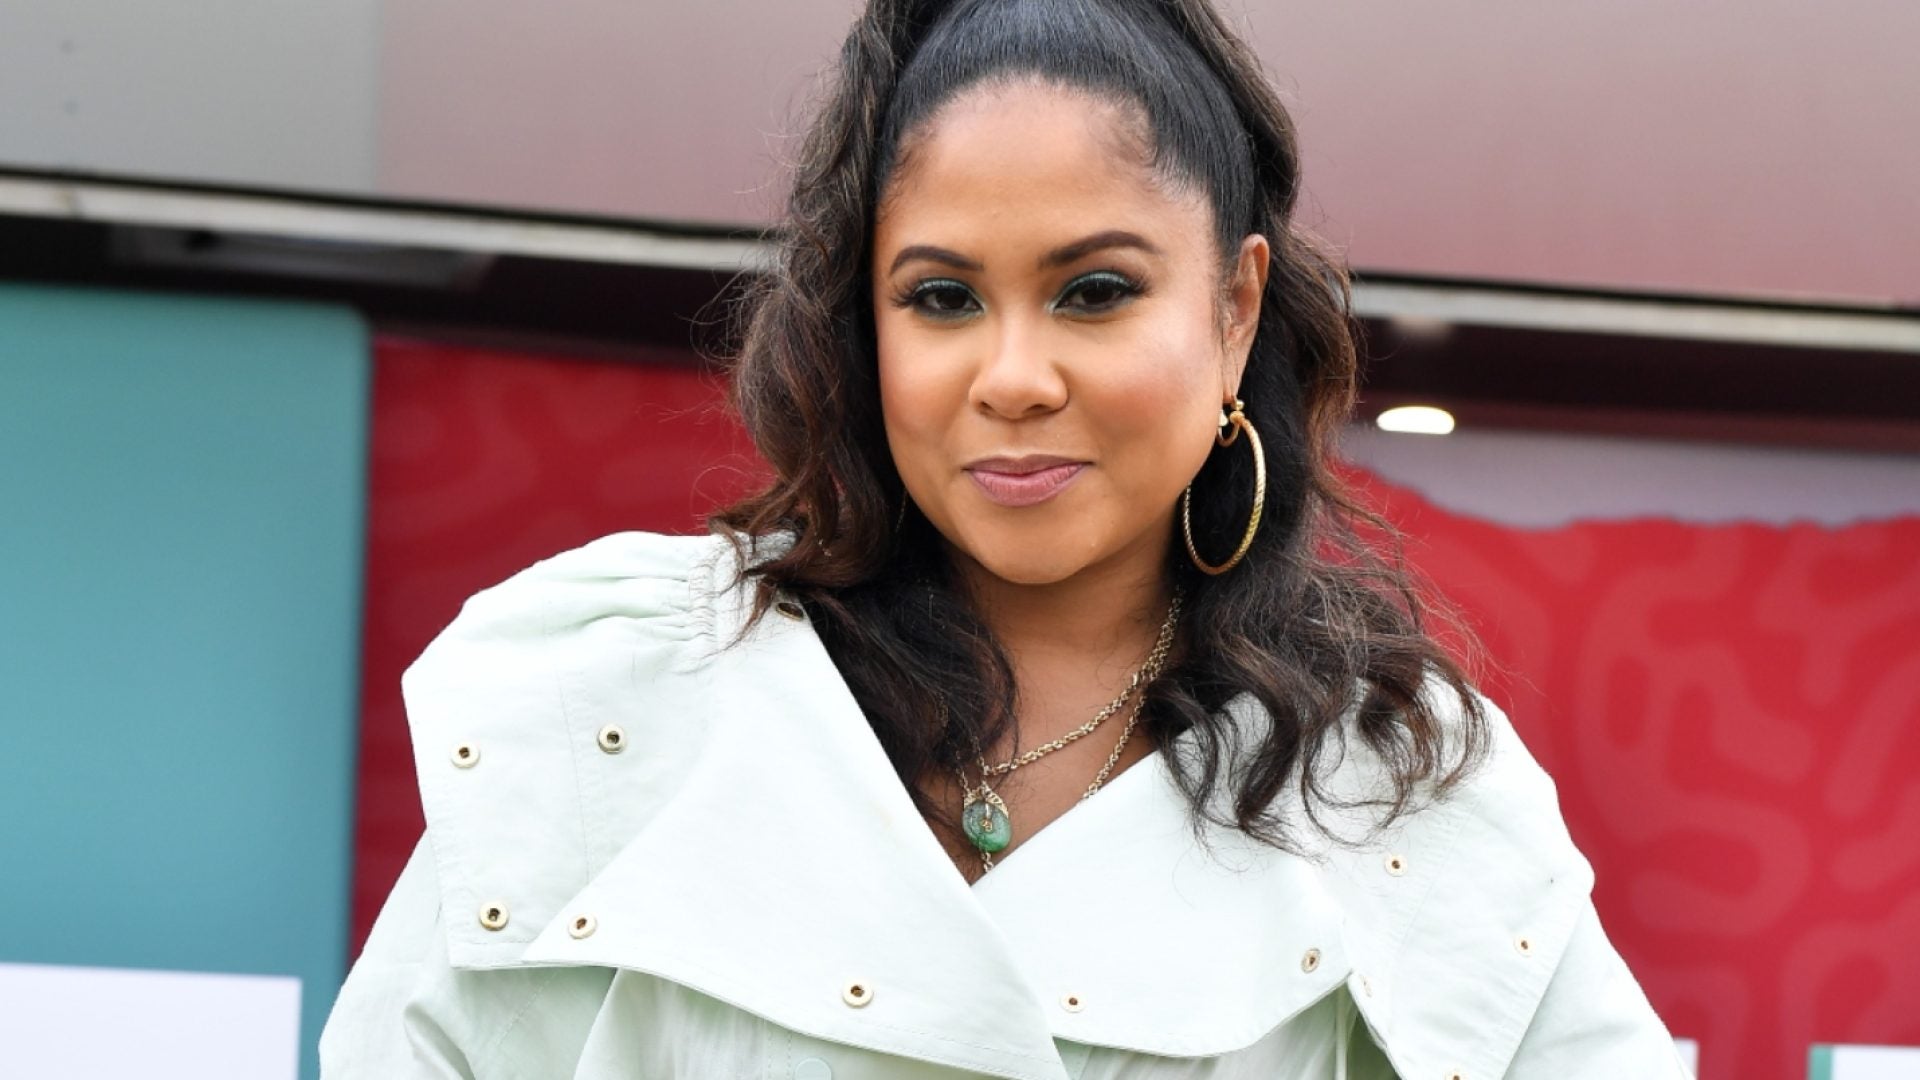 A High Cholesterol Scare Motivated Angela Yee To Get Serious About Heart Health: 'My Levels Were So High'